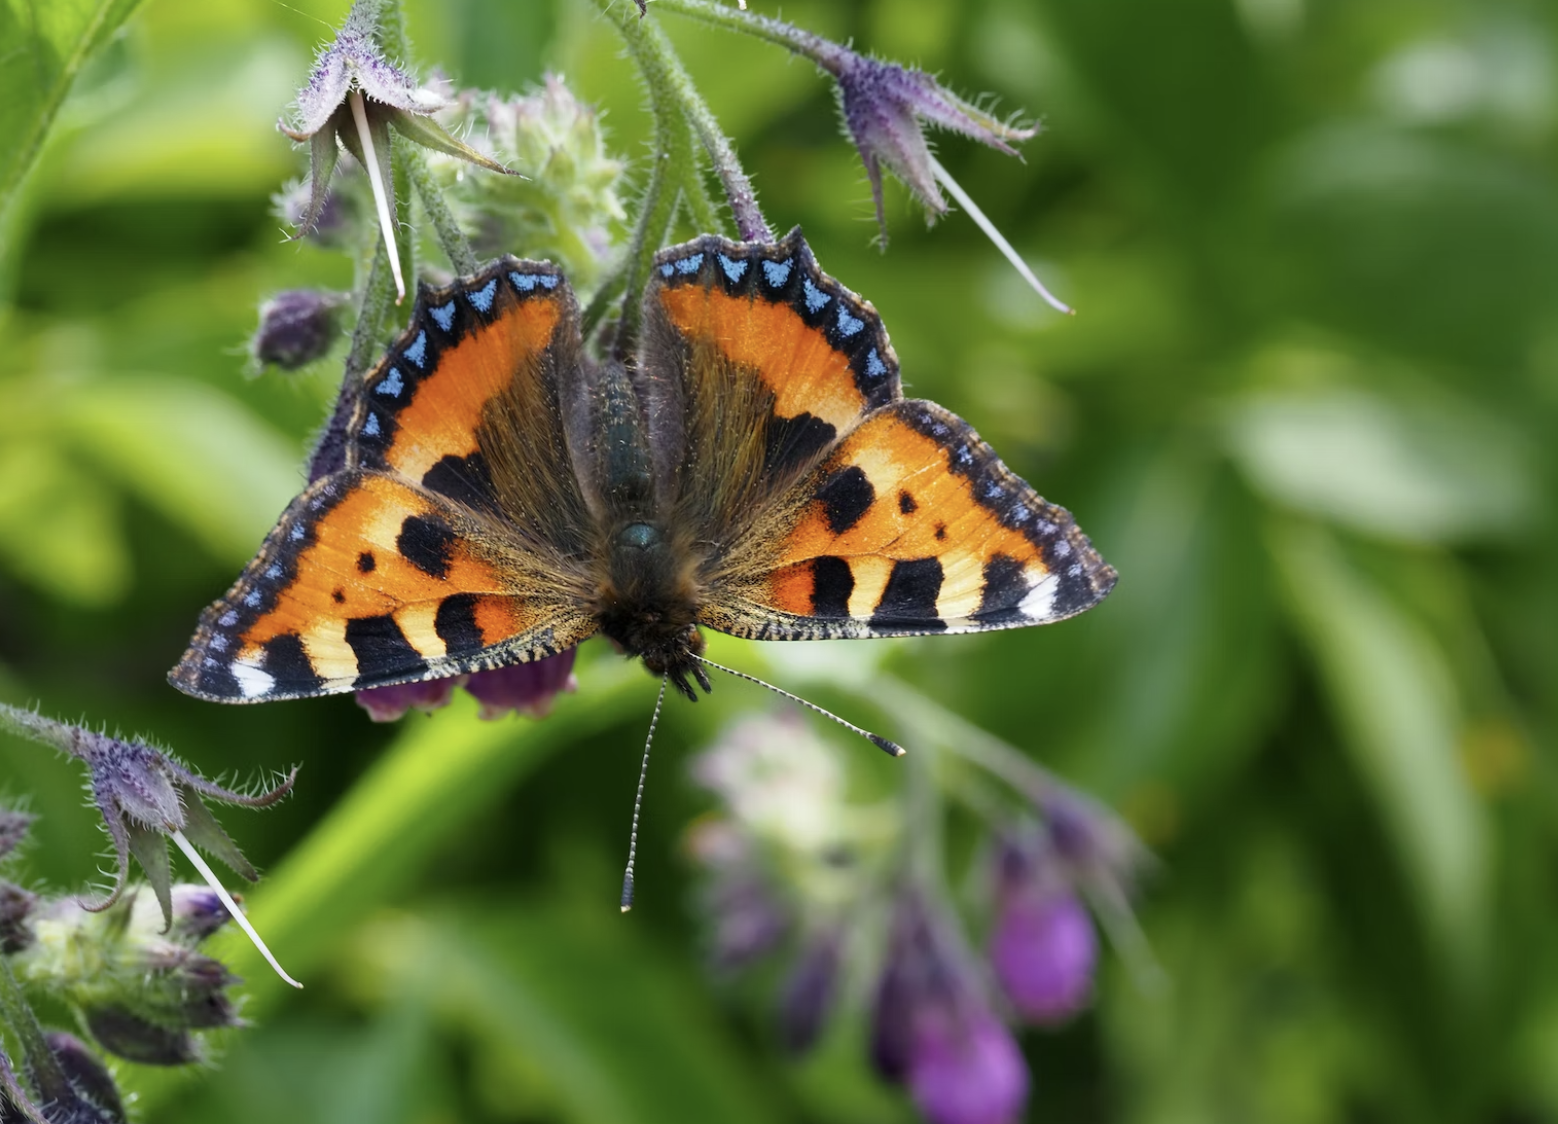 Orange and black butterfly perched on a green and purple plant